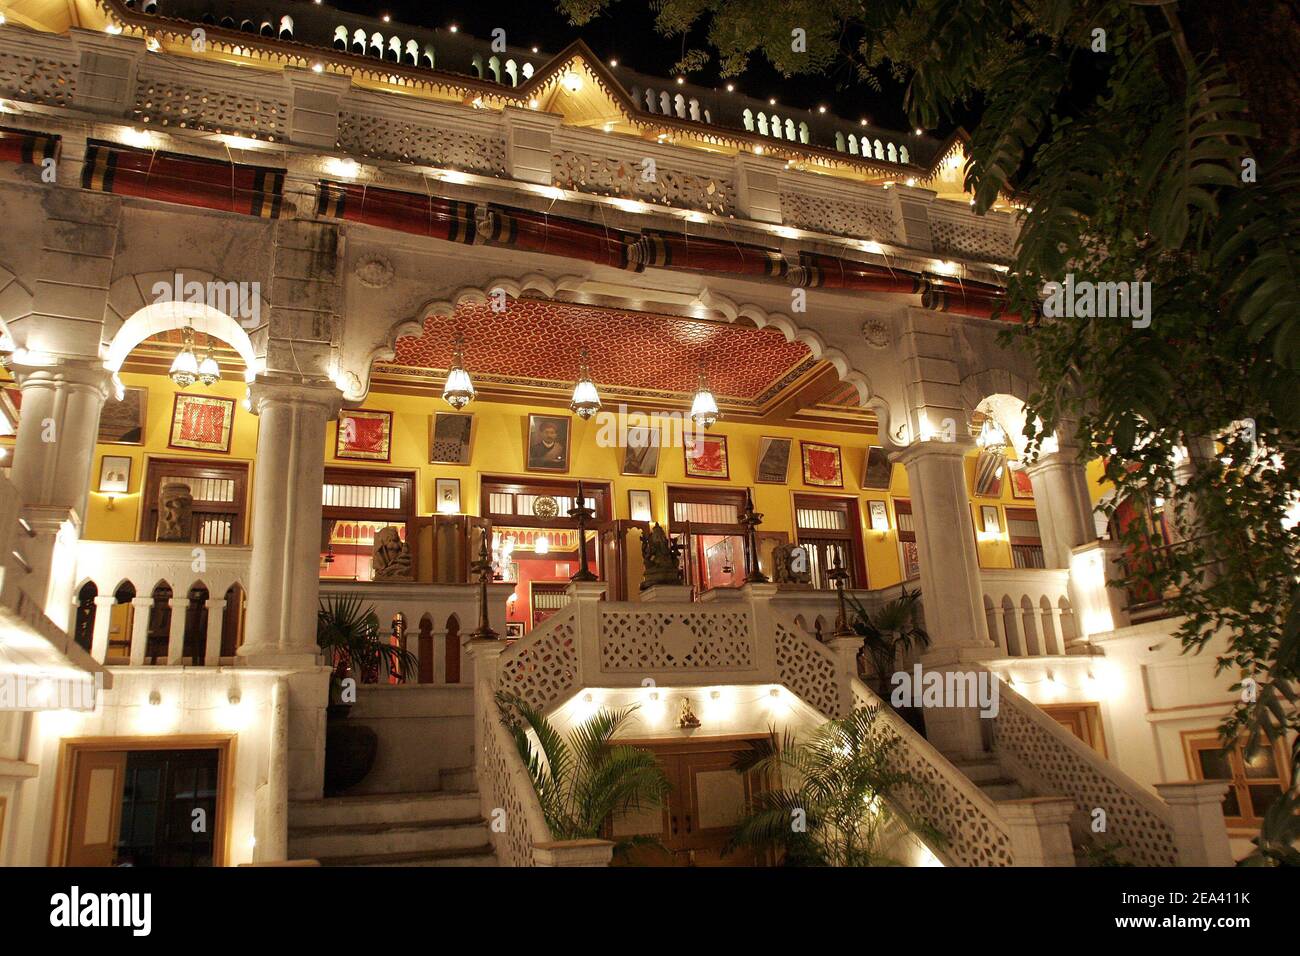 EXCLUSIVE. Outside view of the recently restored palace of Umang Hutheesing, Lord of Ahmedabad, in Ahmedabad, Gujarat State, India, in March 2005. Photo by Alexis Orand/ABACA. Stock Photo